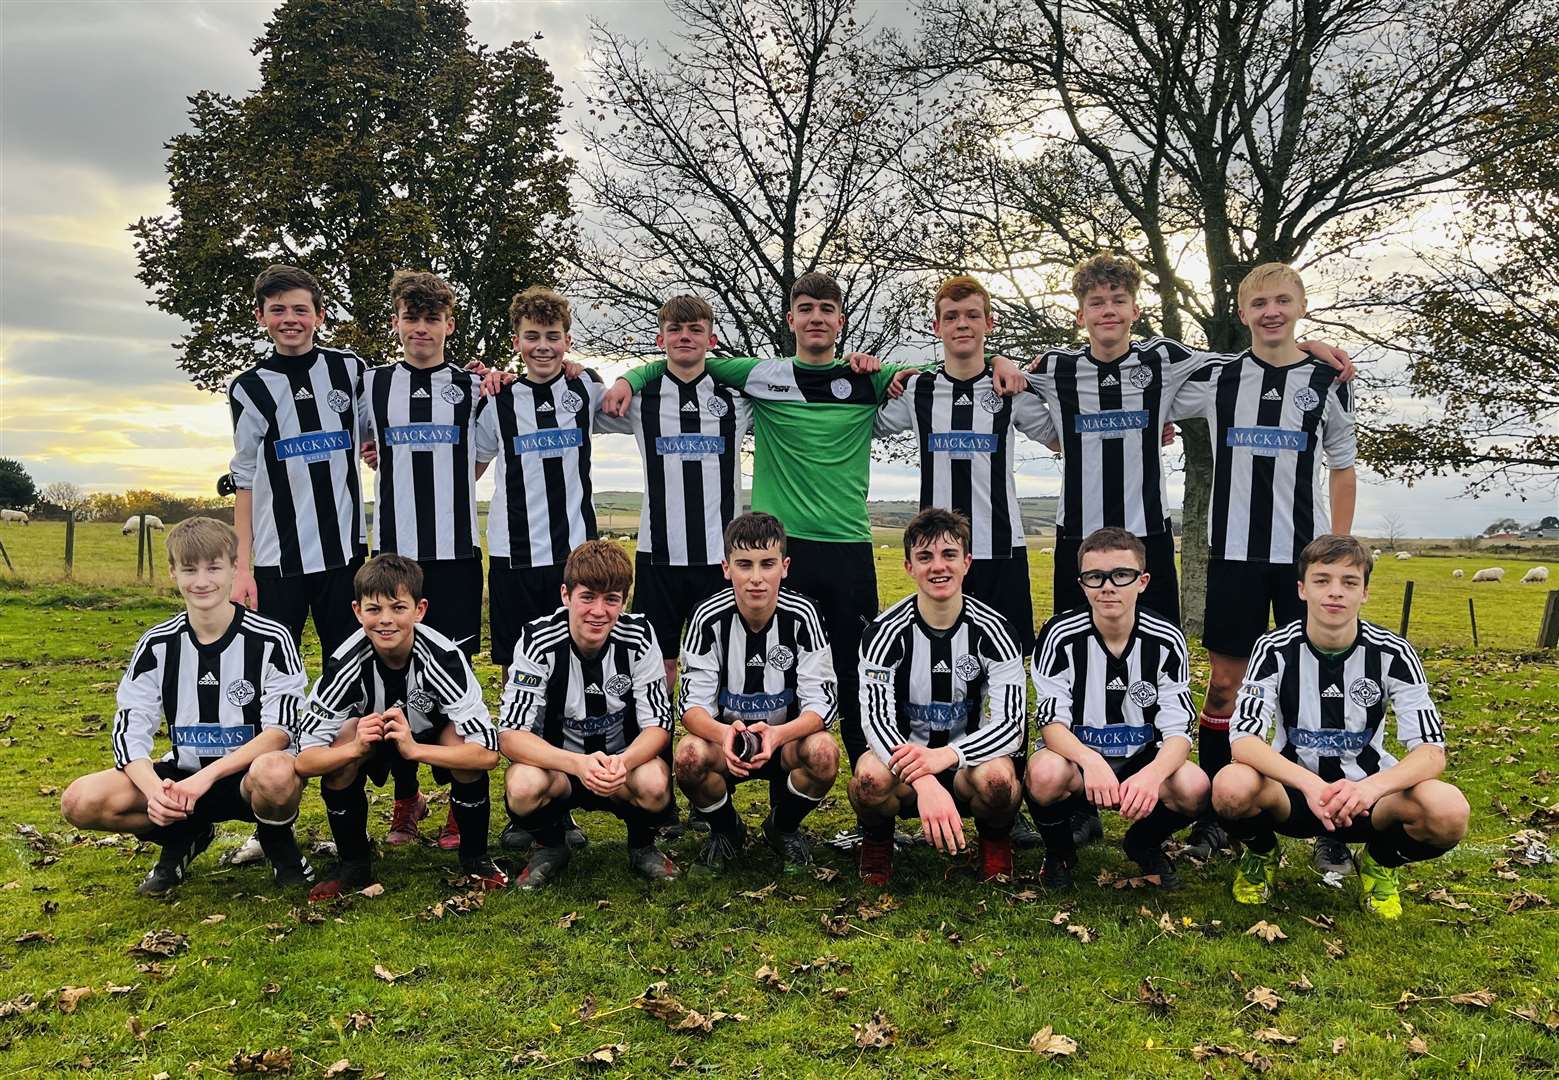 The Caithness United U16s who defeated their Do Soccer counterparts at Balintore’s Seaboard Park.